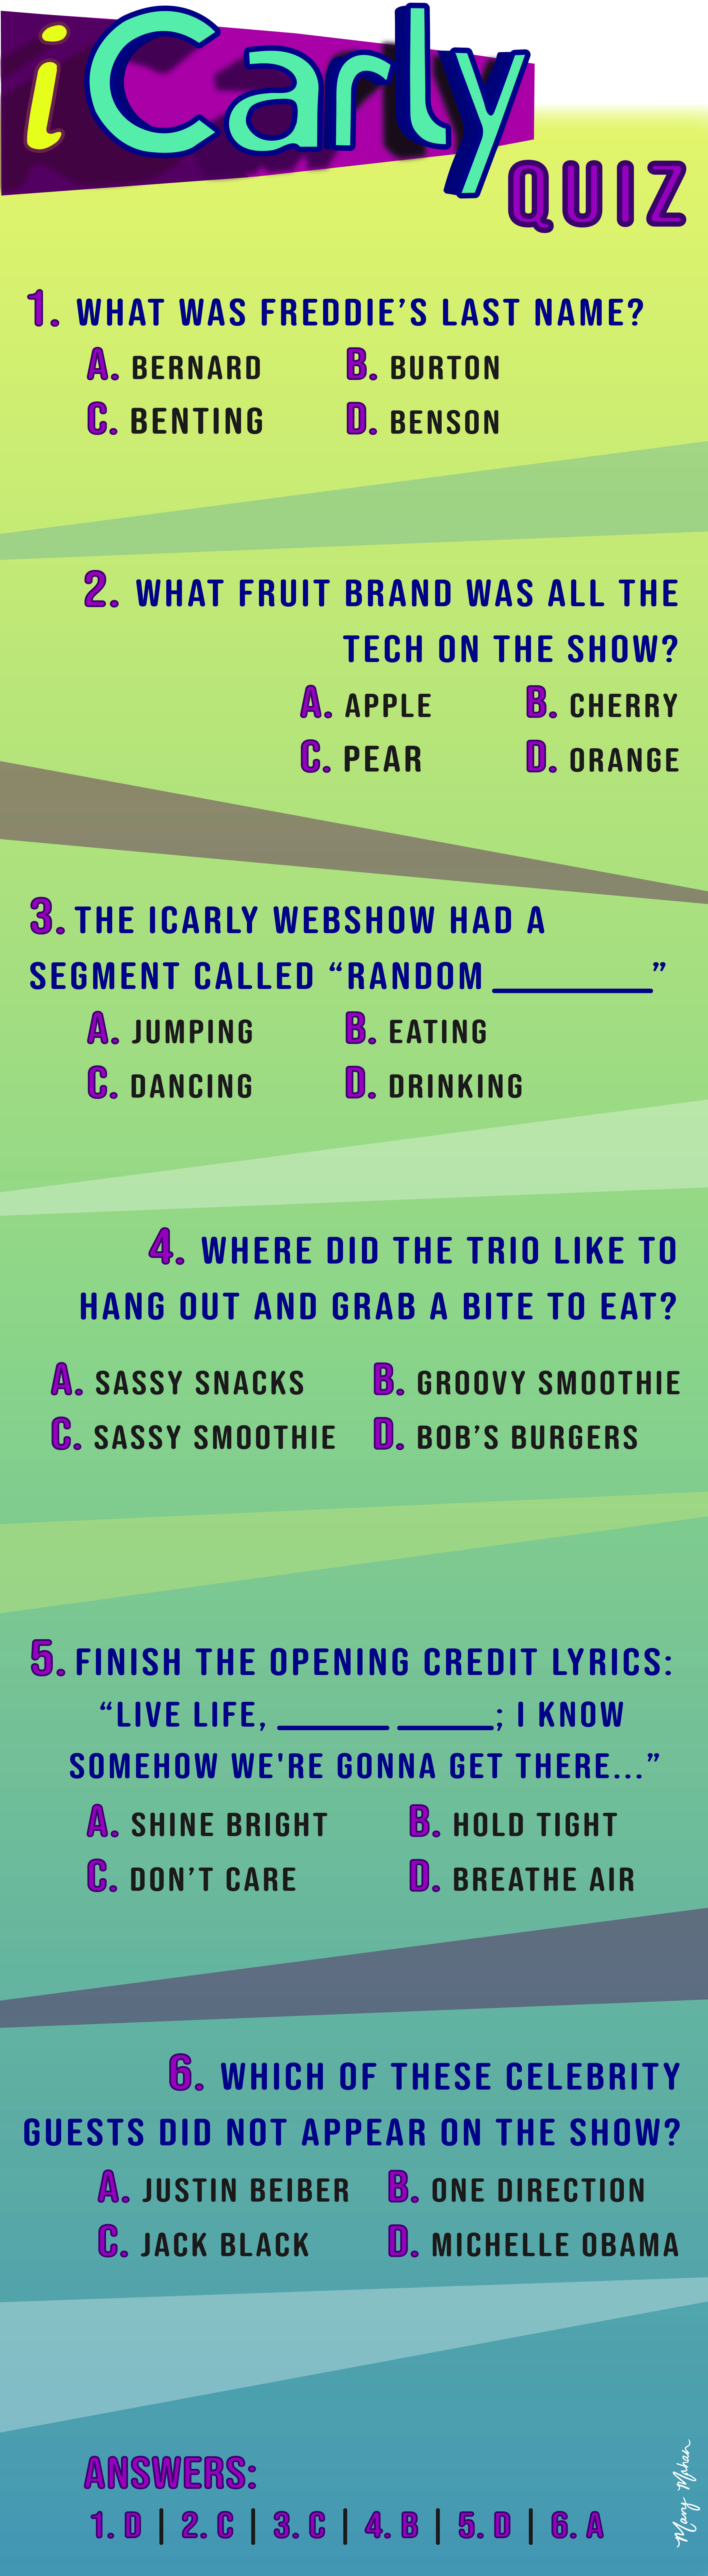 iCarly quiz to test Nikelodean fans knowledge of the retired show.